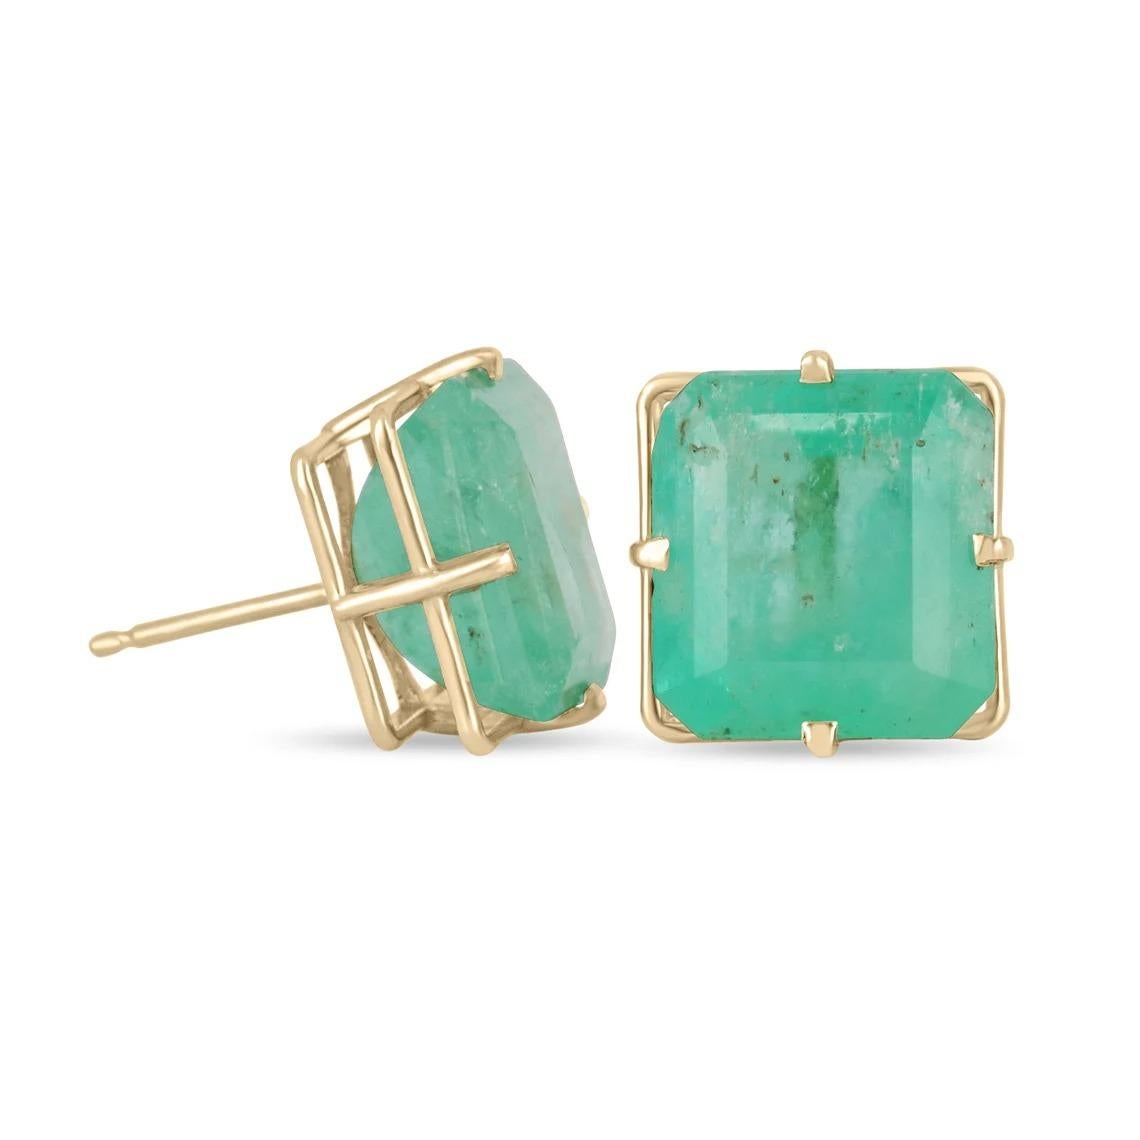 Featured here is a beautiful set of HUGE AND VERY RARE Asscher cut Colombian emerald studs in fine 14K yellow gold. Displayed are TRUE statement size medium-green emeralds with good transparency, accented by offset gold prongs, allowing for the